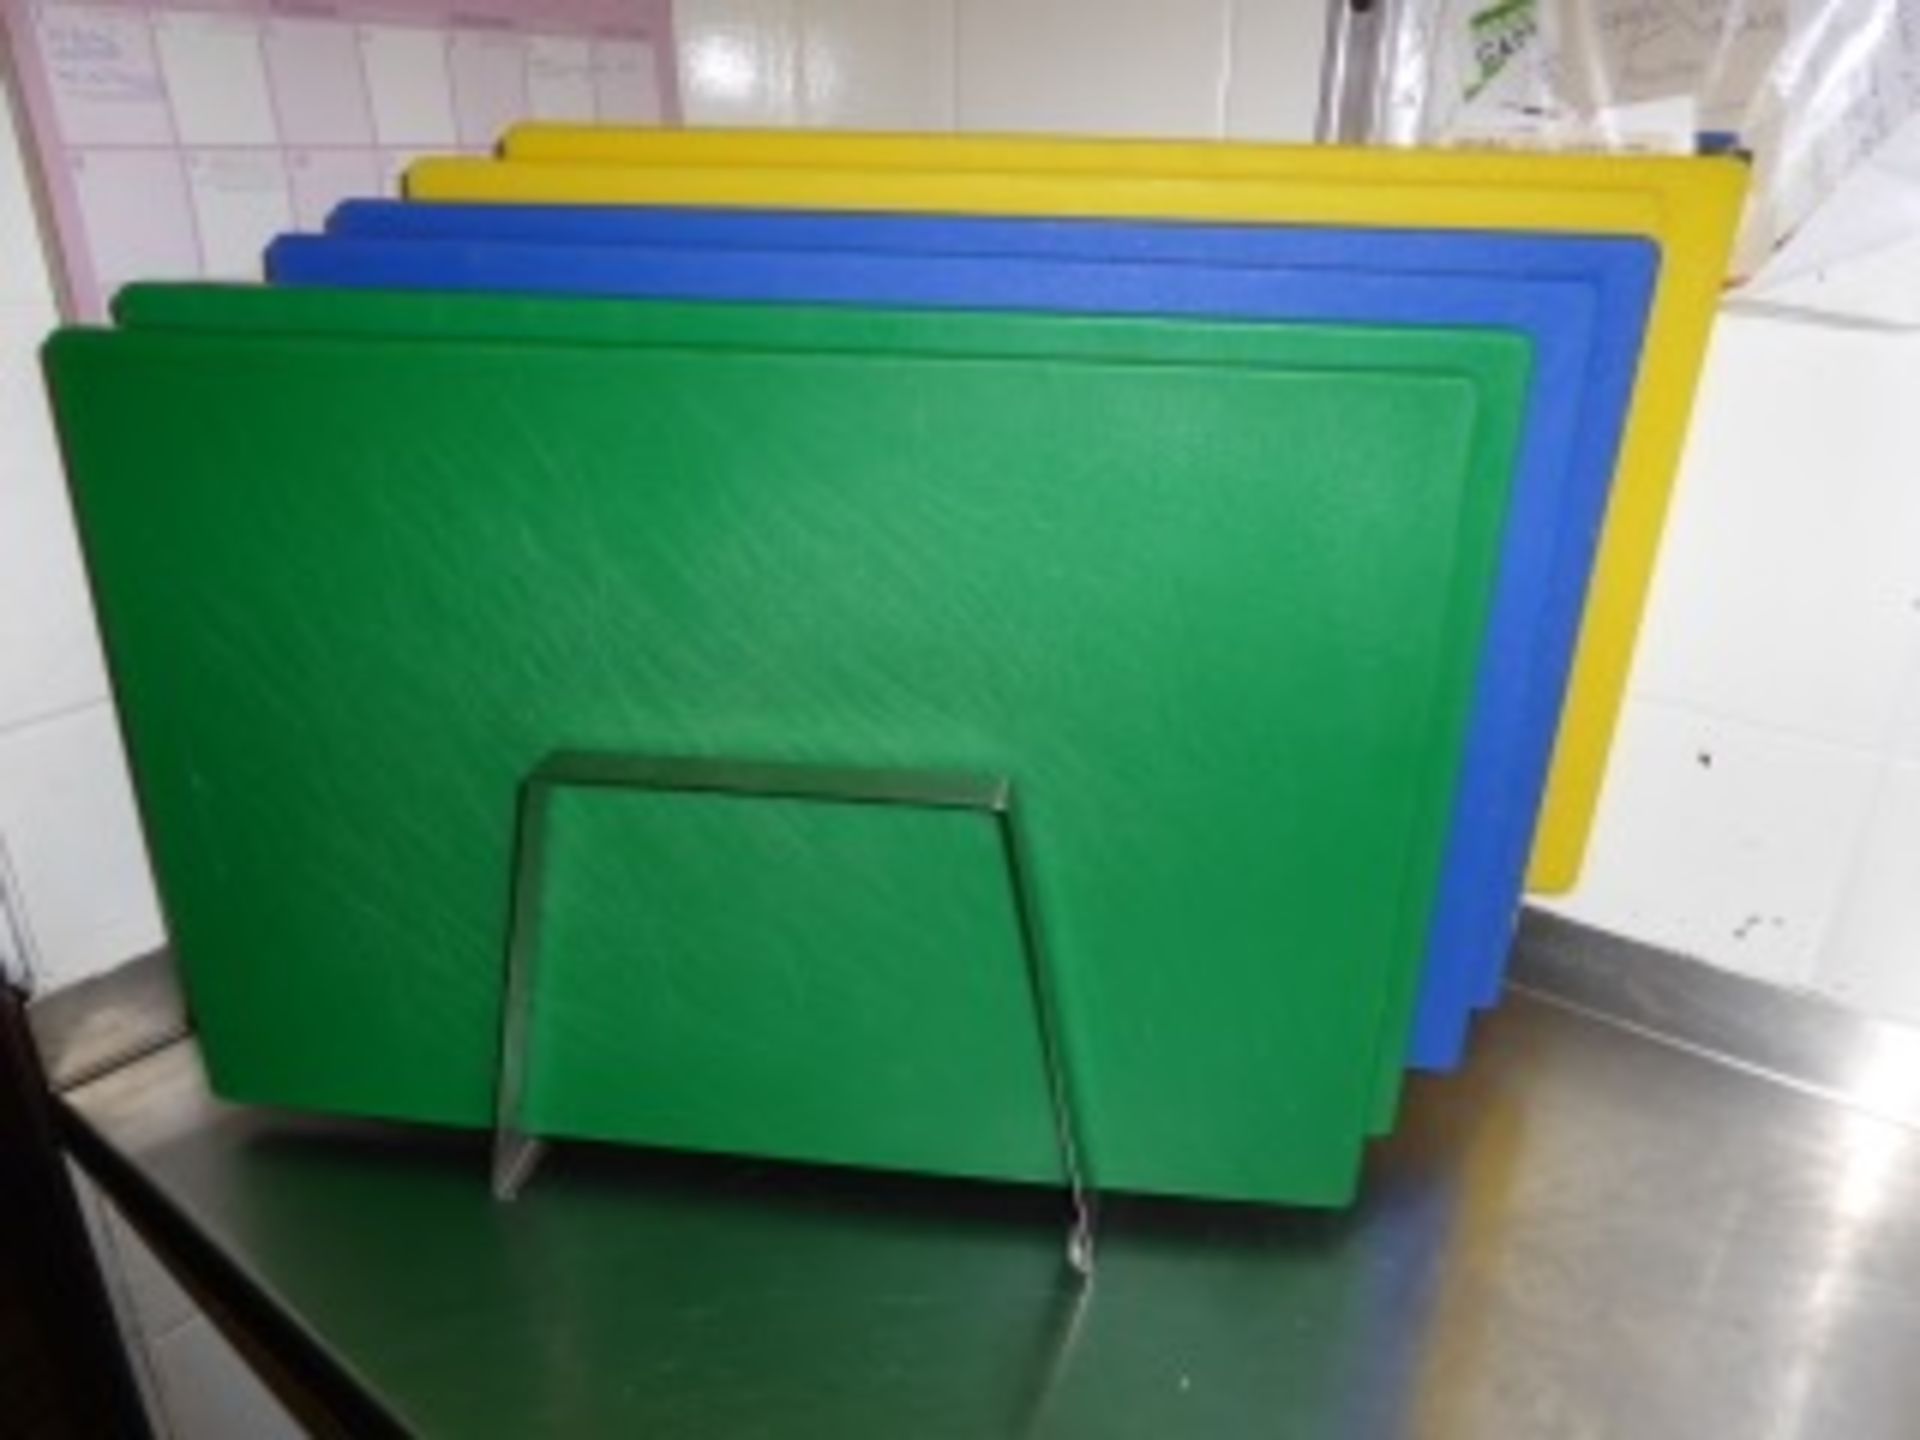 6 x Colour Coded Chopping Boards With Stands - Used For Sandwhich Preparation - Includes Stand - - Image 2 of 2